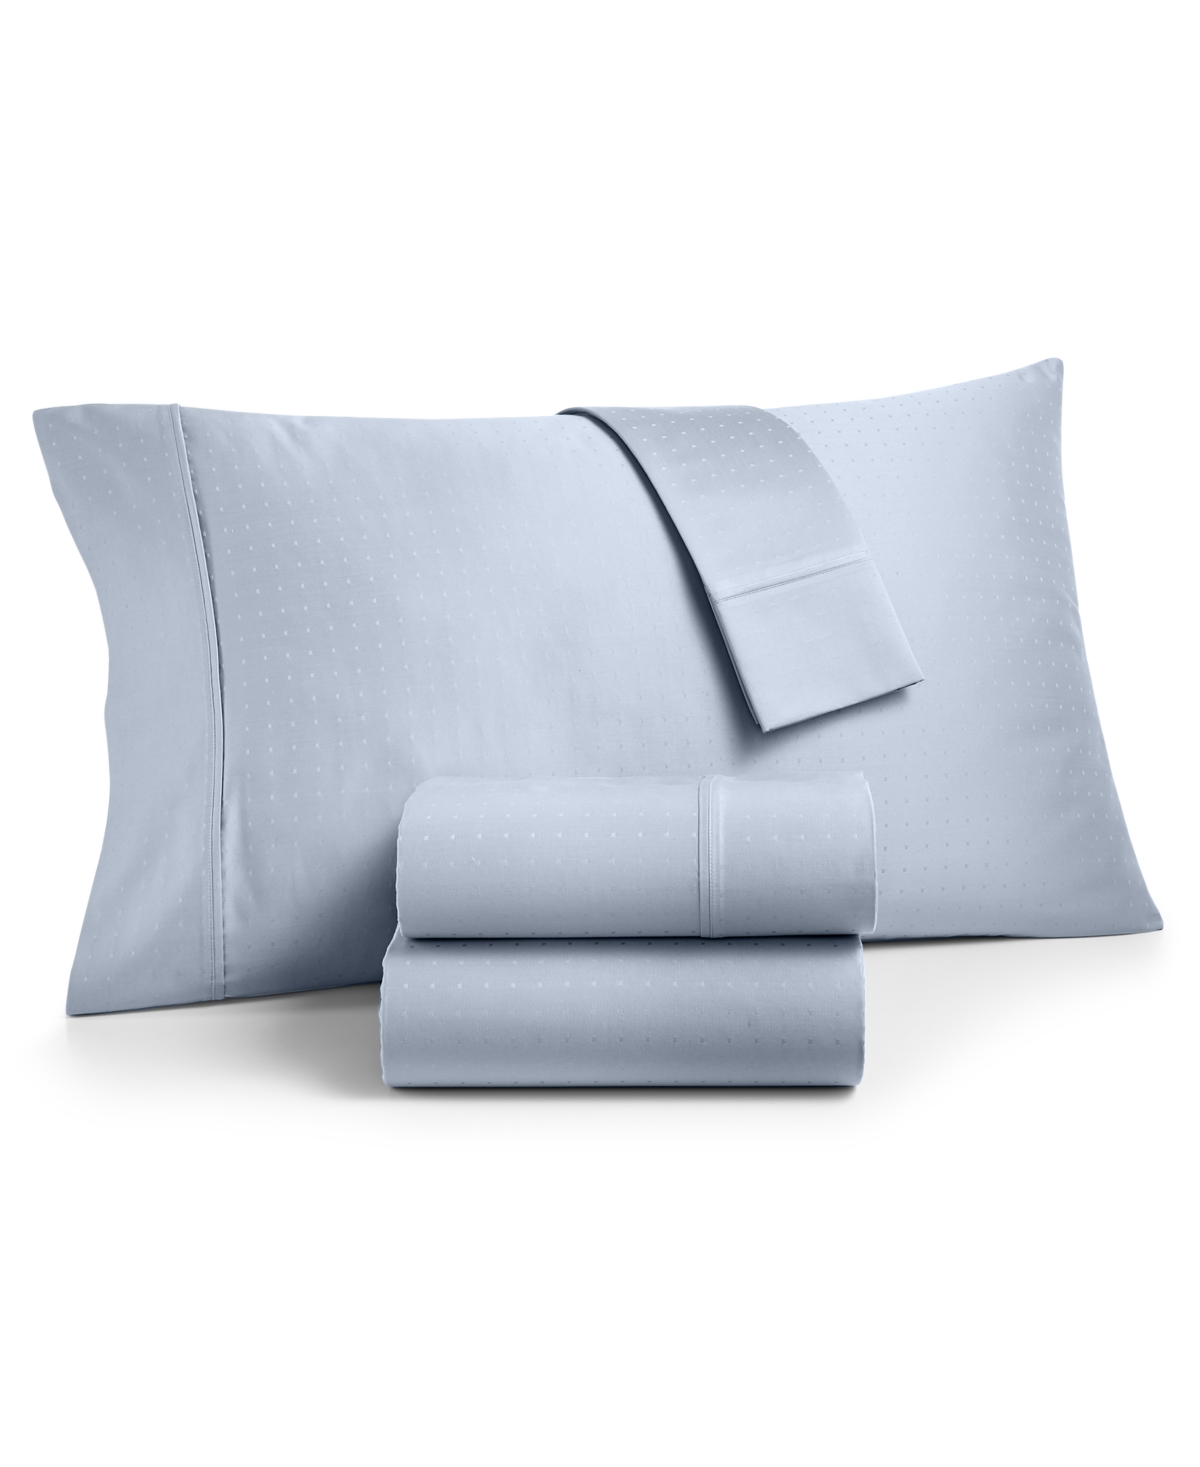 Charter Club Sleep Luxe 700 Thread Count 100% Egyptian Cotton Pillowcase Pair, King, Created For Macy's In Light Blue